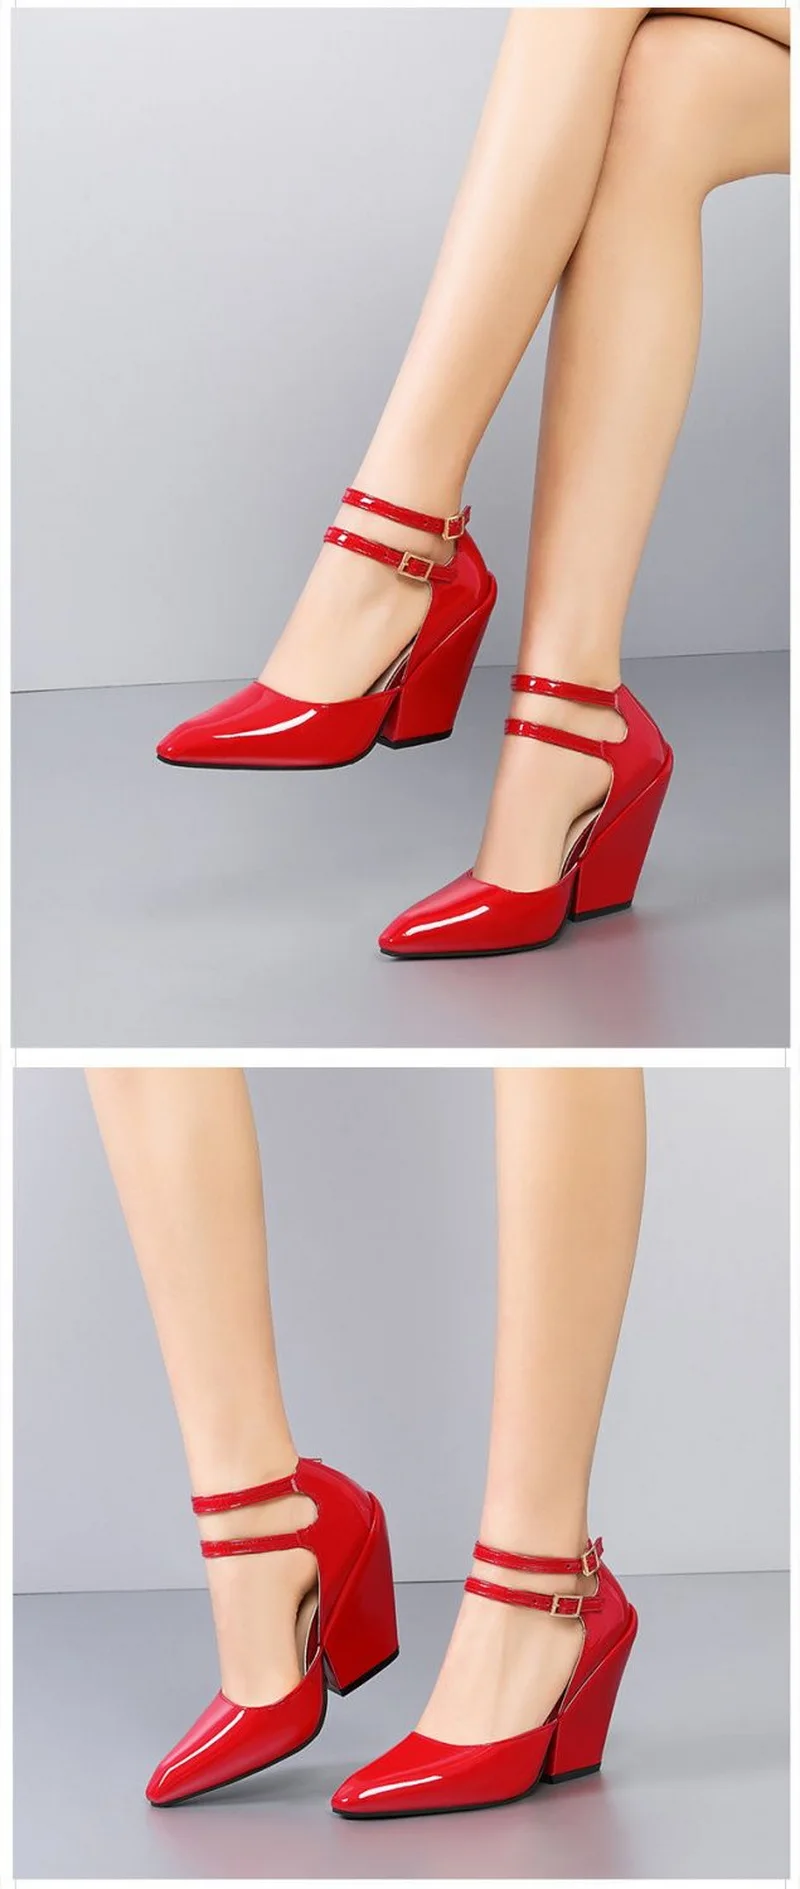 FHC 2024 Spring Leather Wedges High Heels,Women Pumps,Sexy Shallow Mary Shoes,11cm,Ankle Buckles Straps,Red,Black,White,Dropship